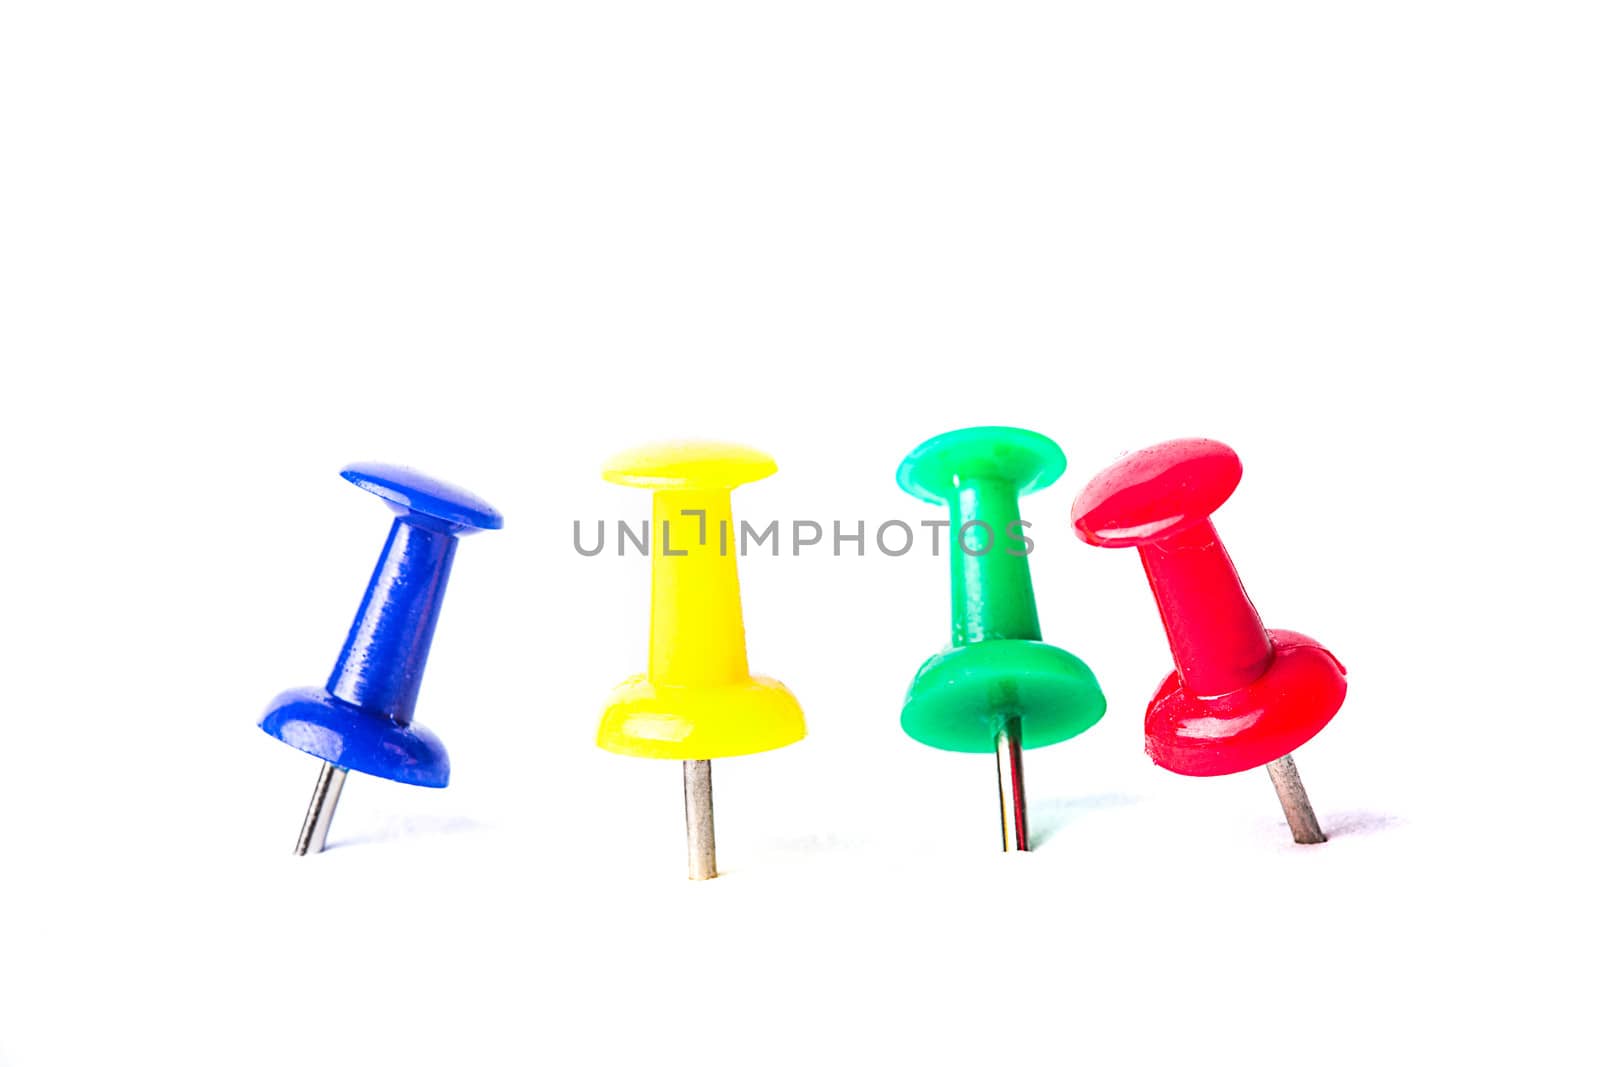 Multi-colored pushpins attached in white background isolated